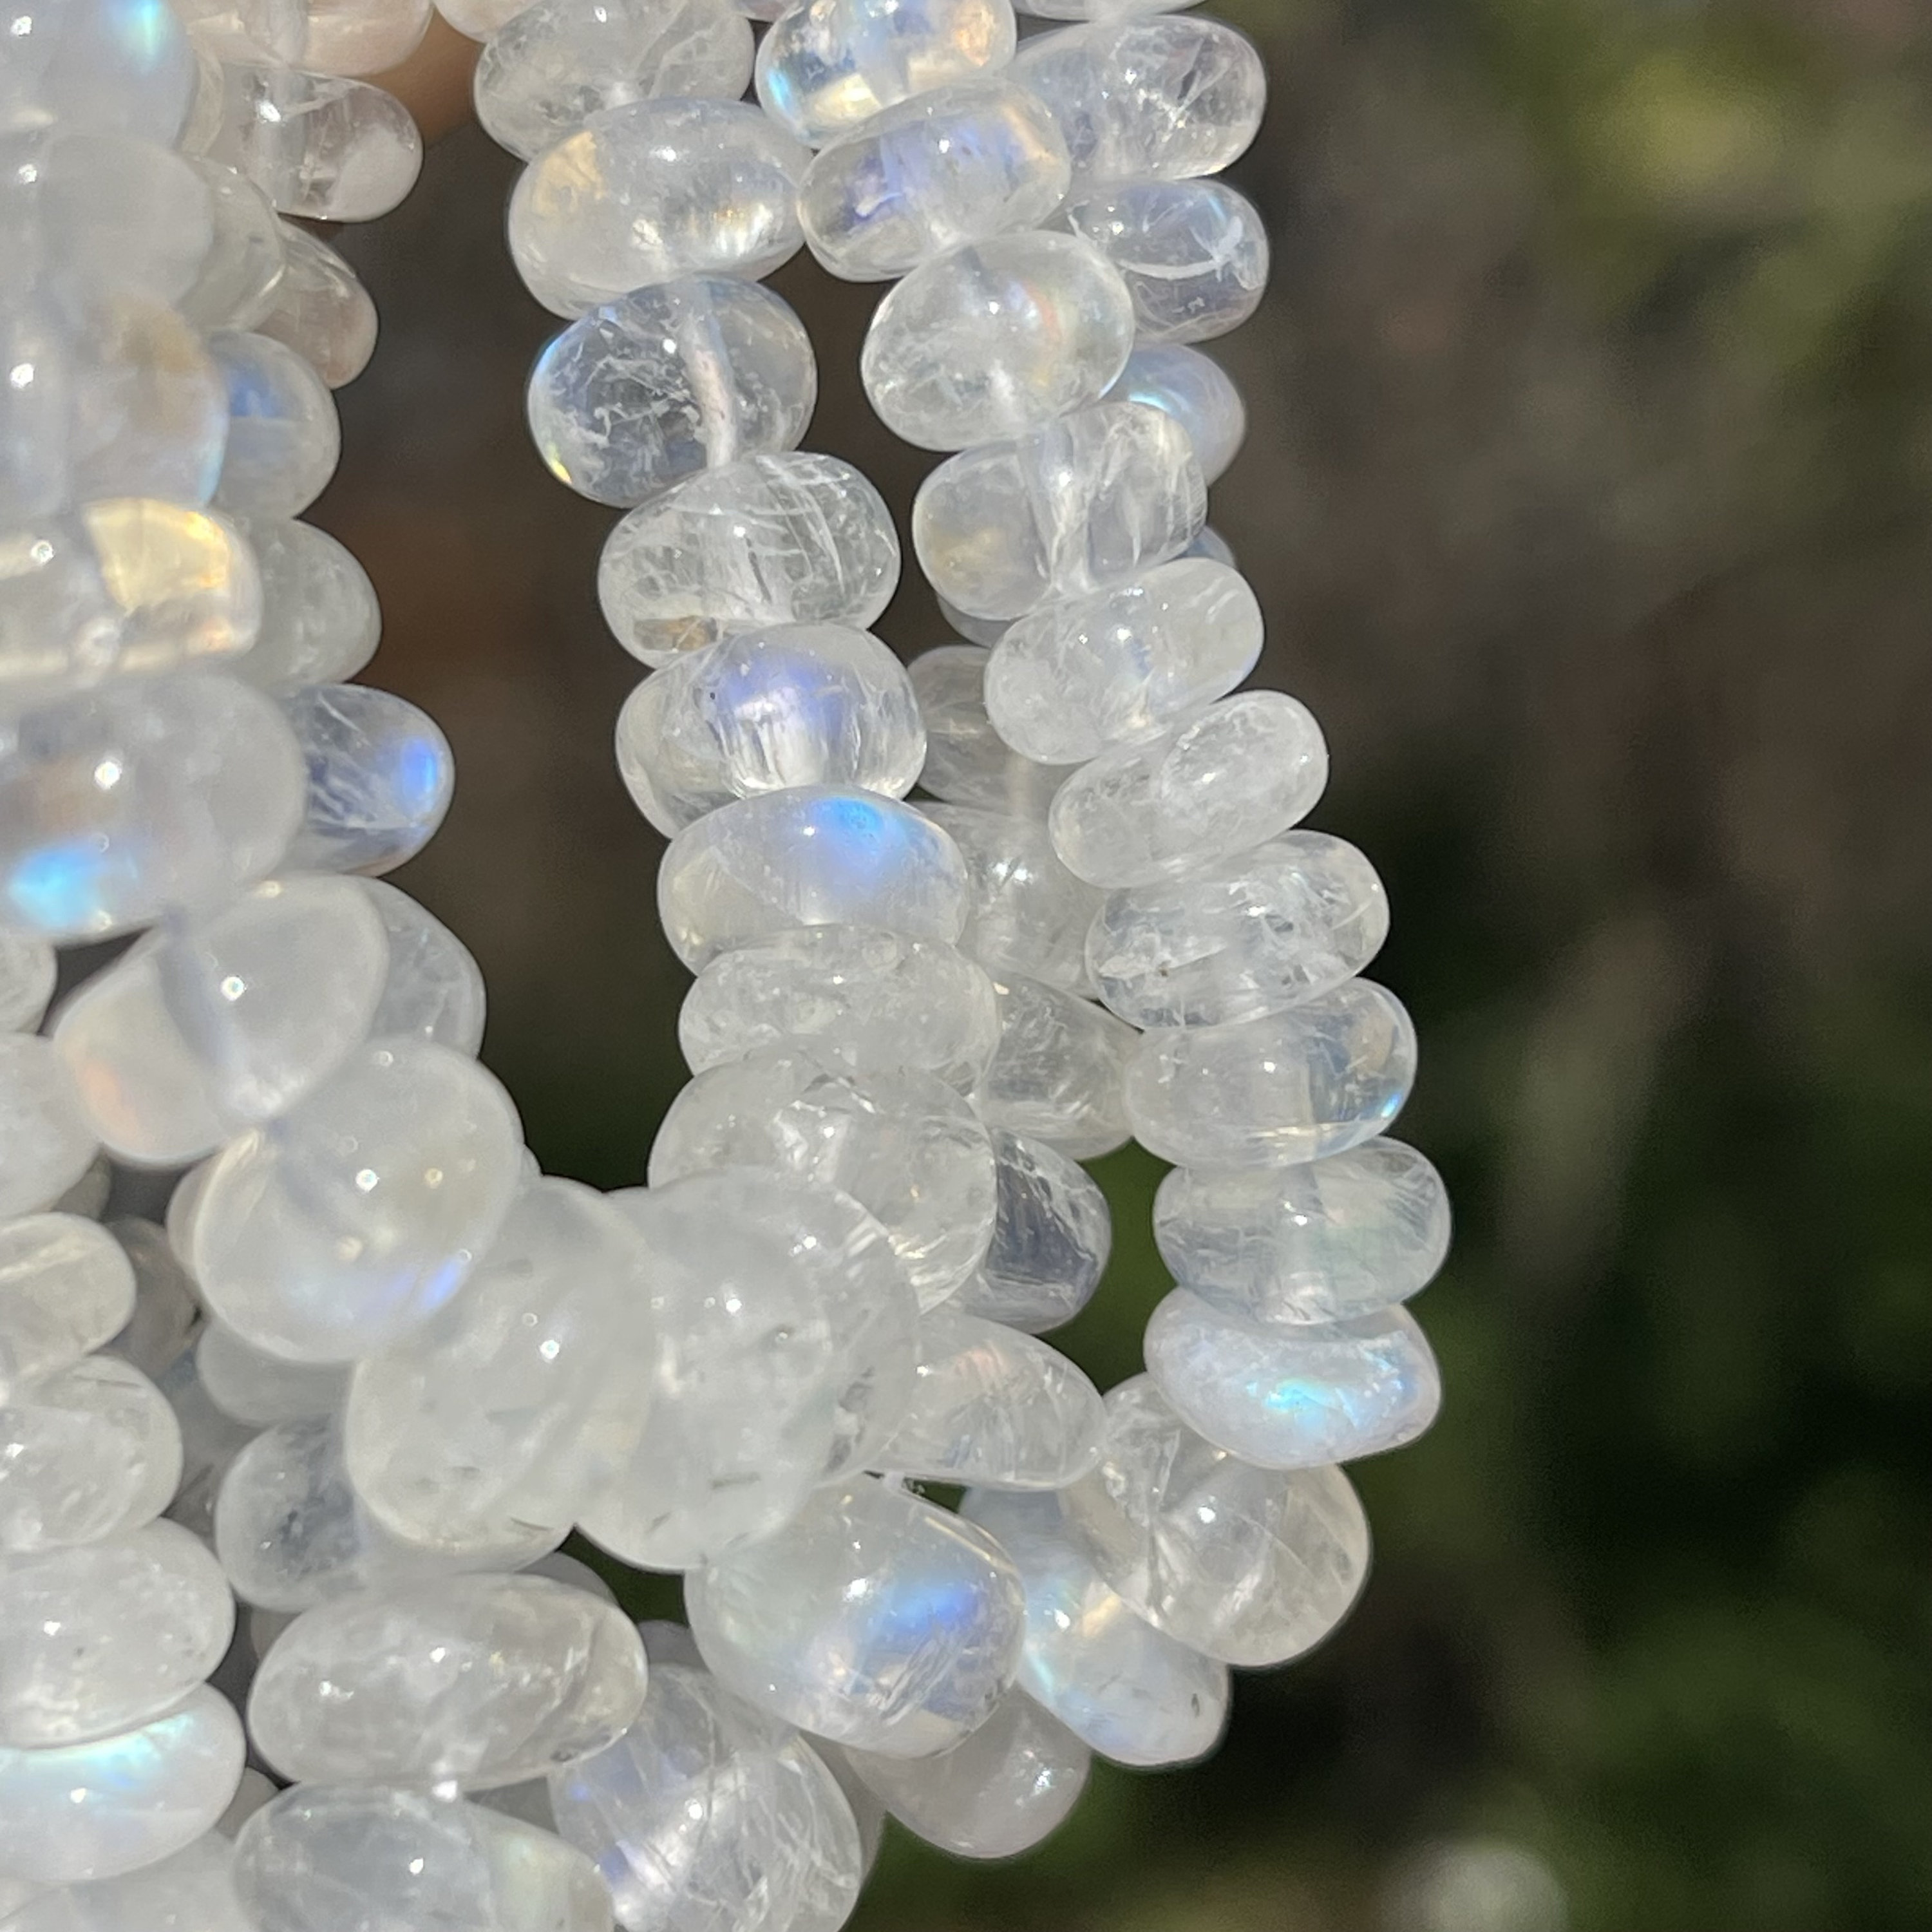 Rainbow Moonstone Rondelles, 5mm 8mm Smooth Beads, Graduated Strand of Blue Moonstone  Beads for Making Beaded Necklace or Bracelet MO8 